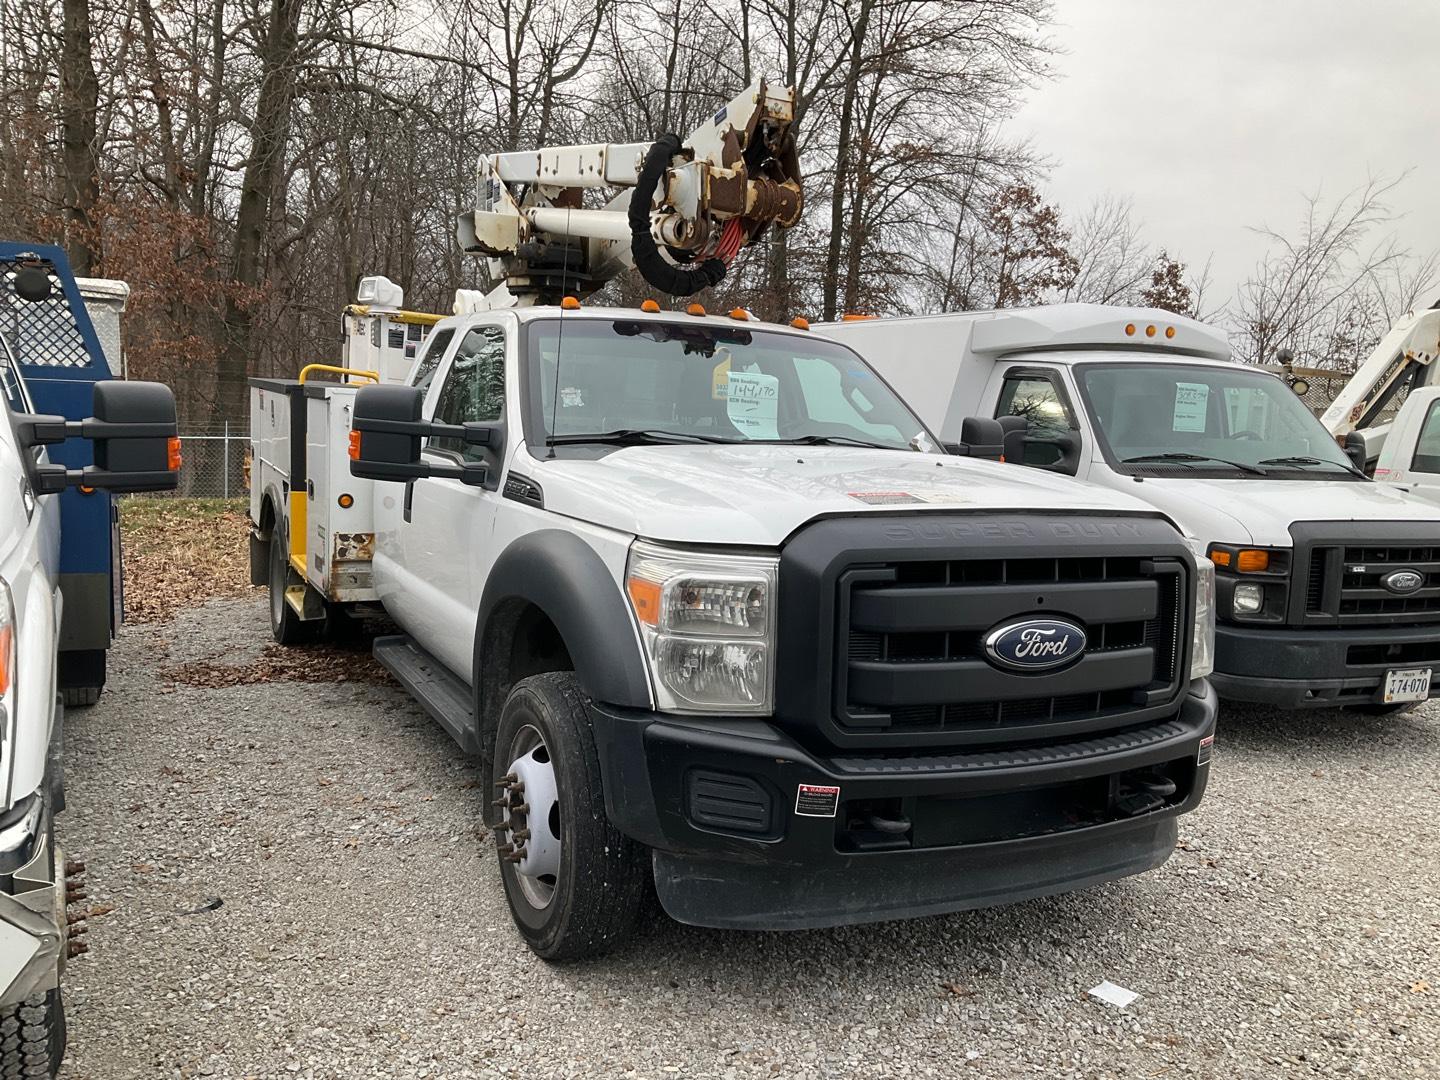 2012 FORD SUPER DUTY F-550 D Serial Number: 1FD0X5HY8CEC67487